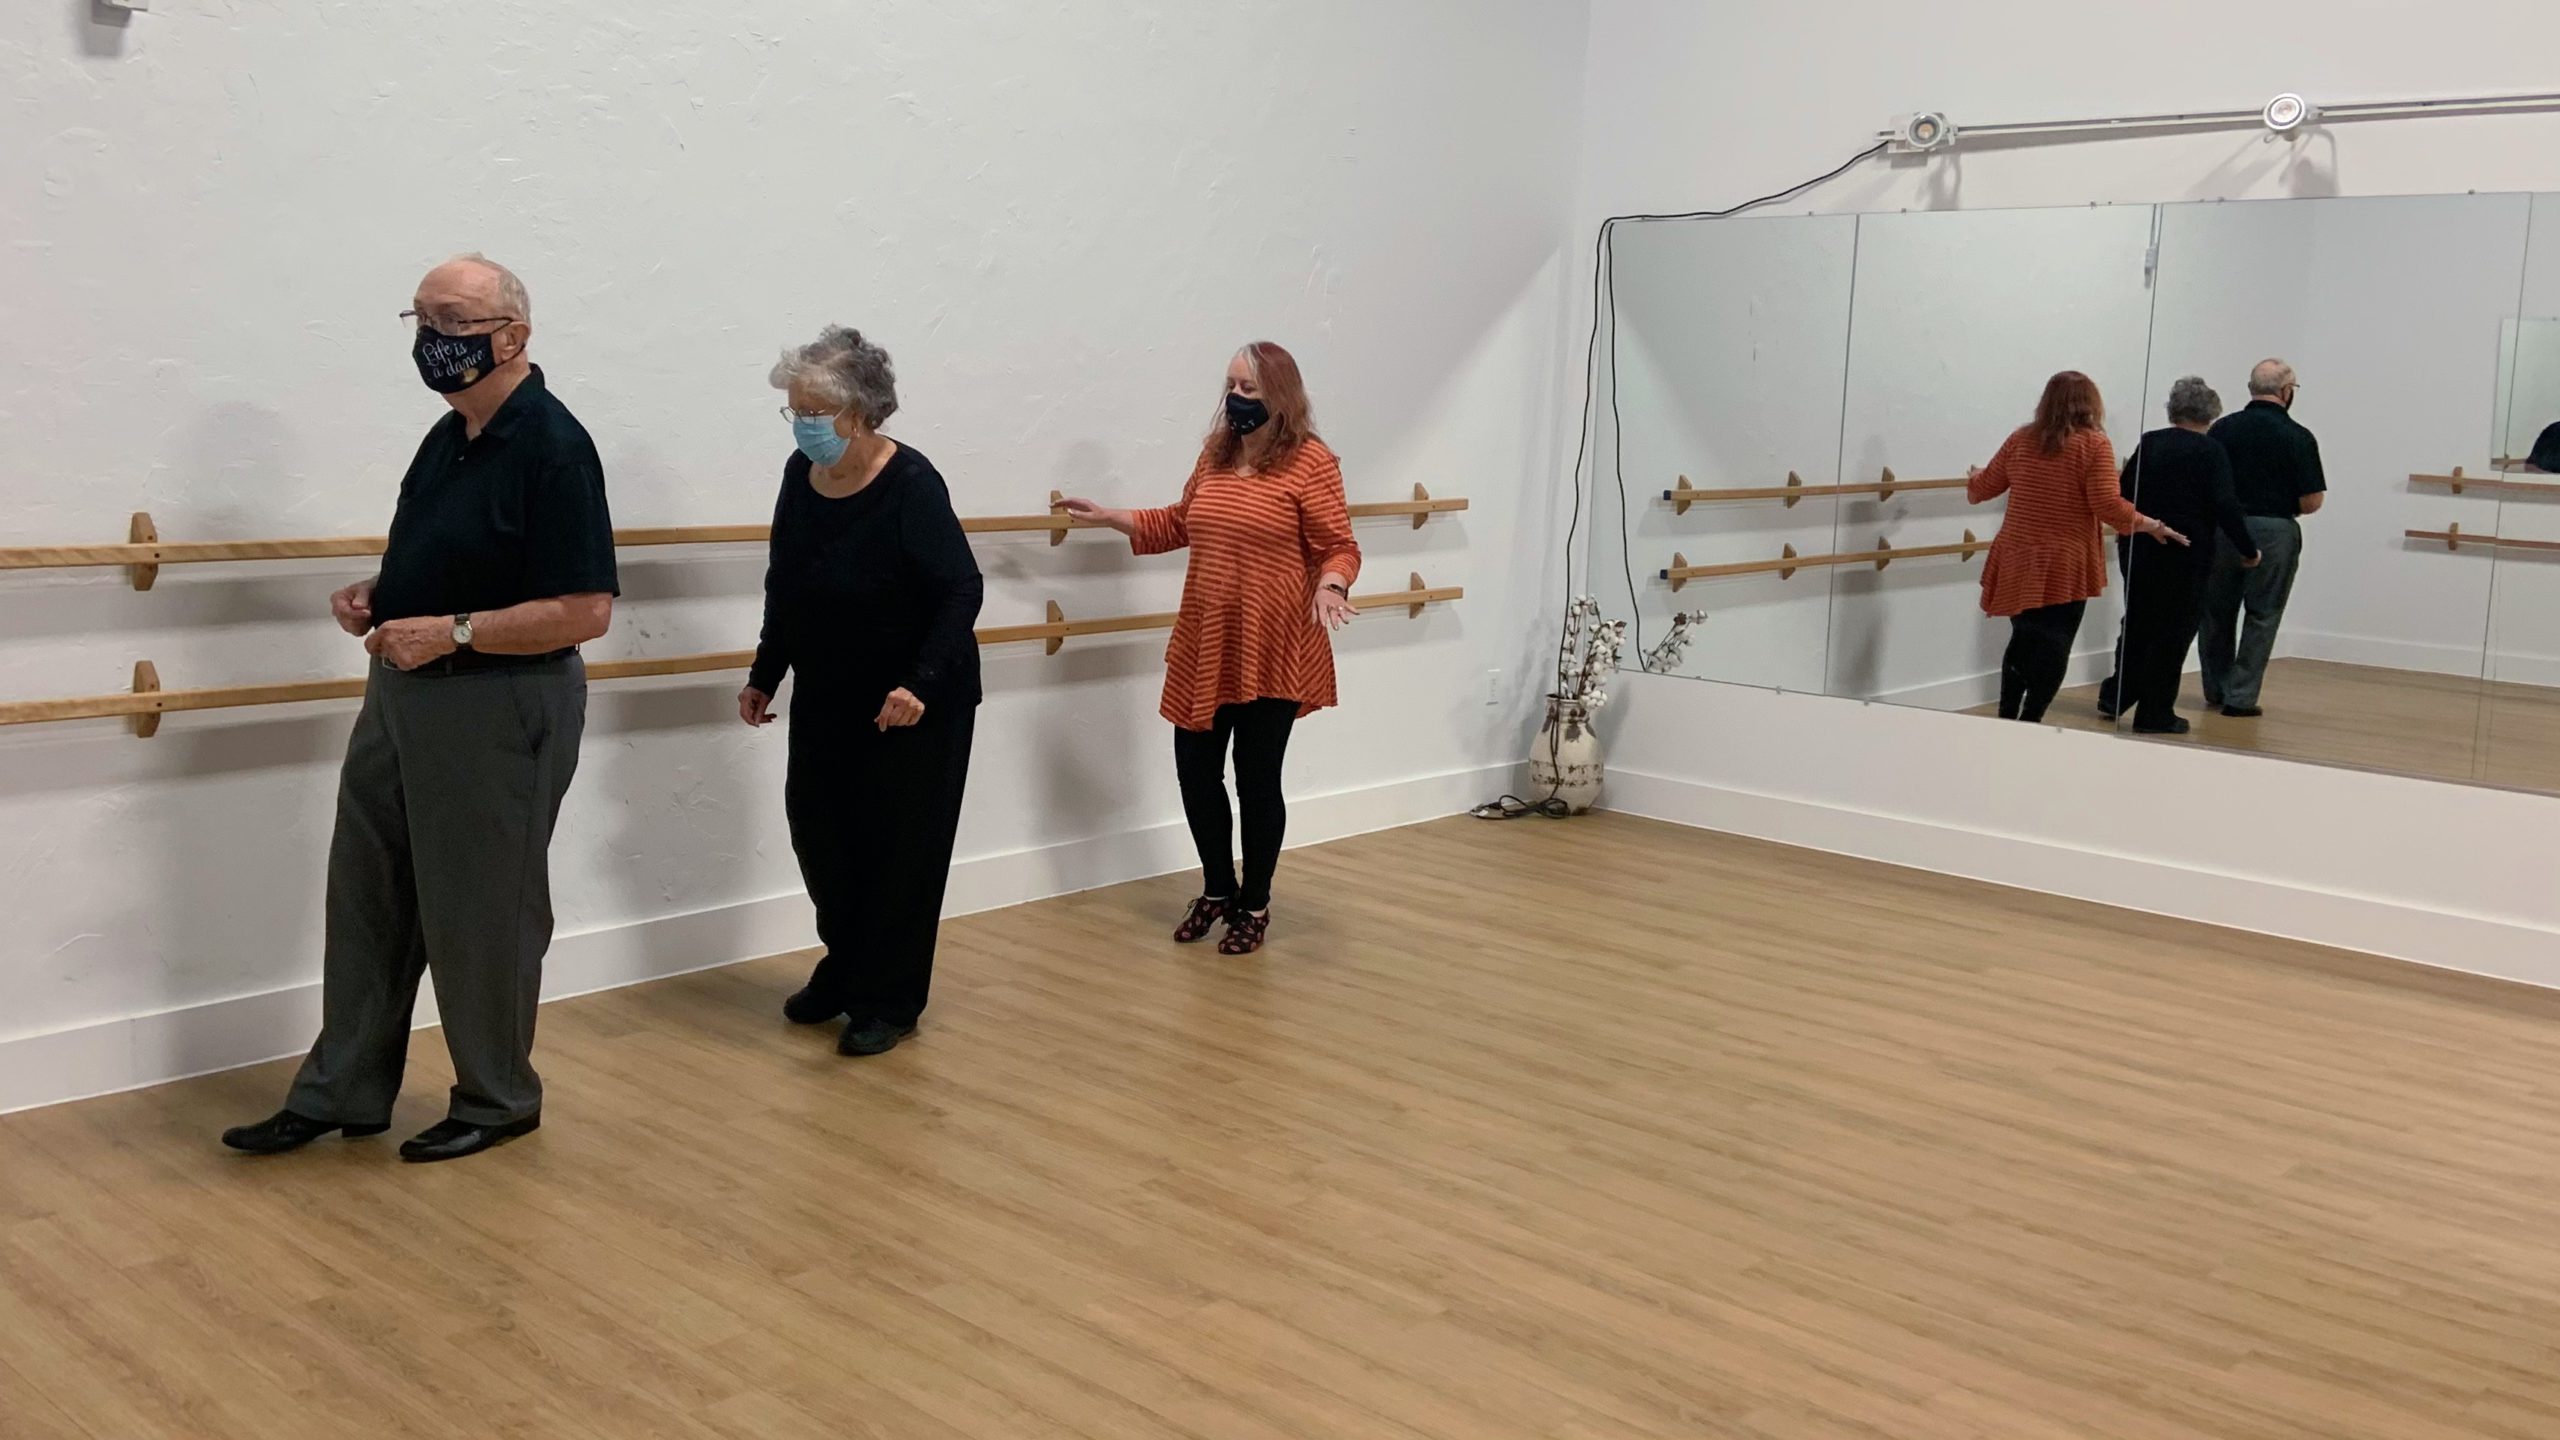 Instructor Cheryl Ewing shows students John and Donna McDermott some choreography at a DanceABLE class at Edgett Dance & Wellness in Halifax.